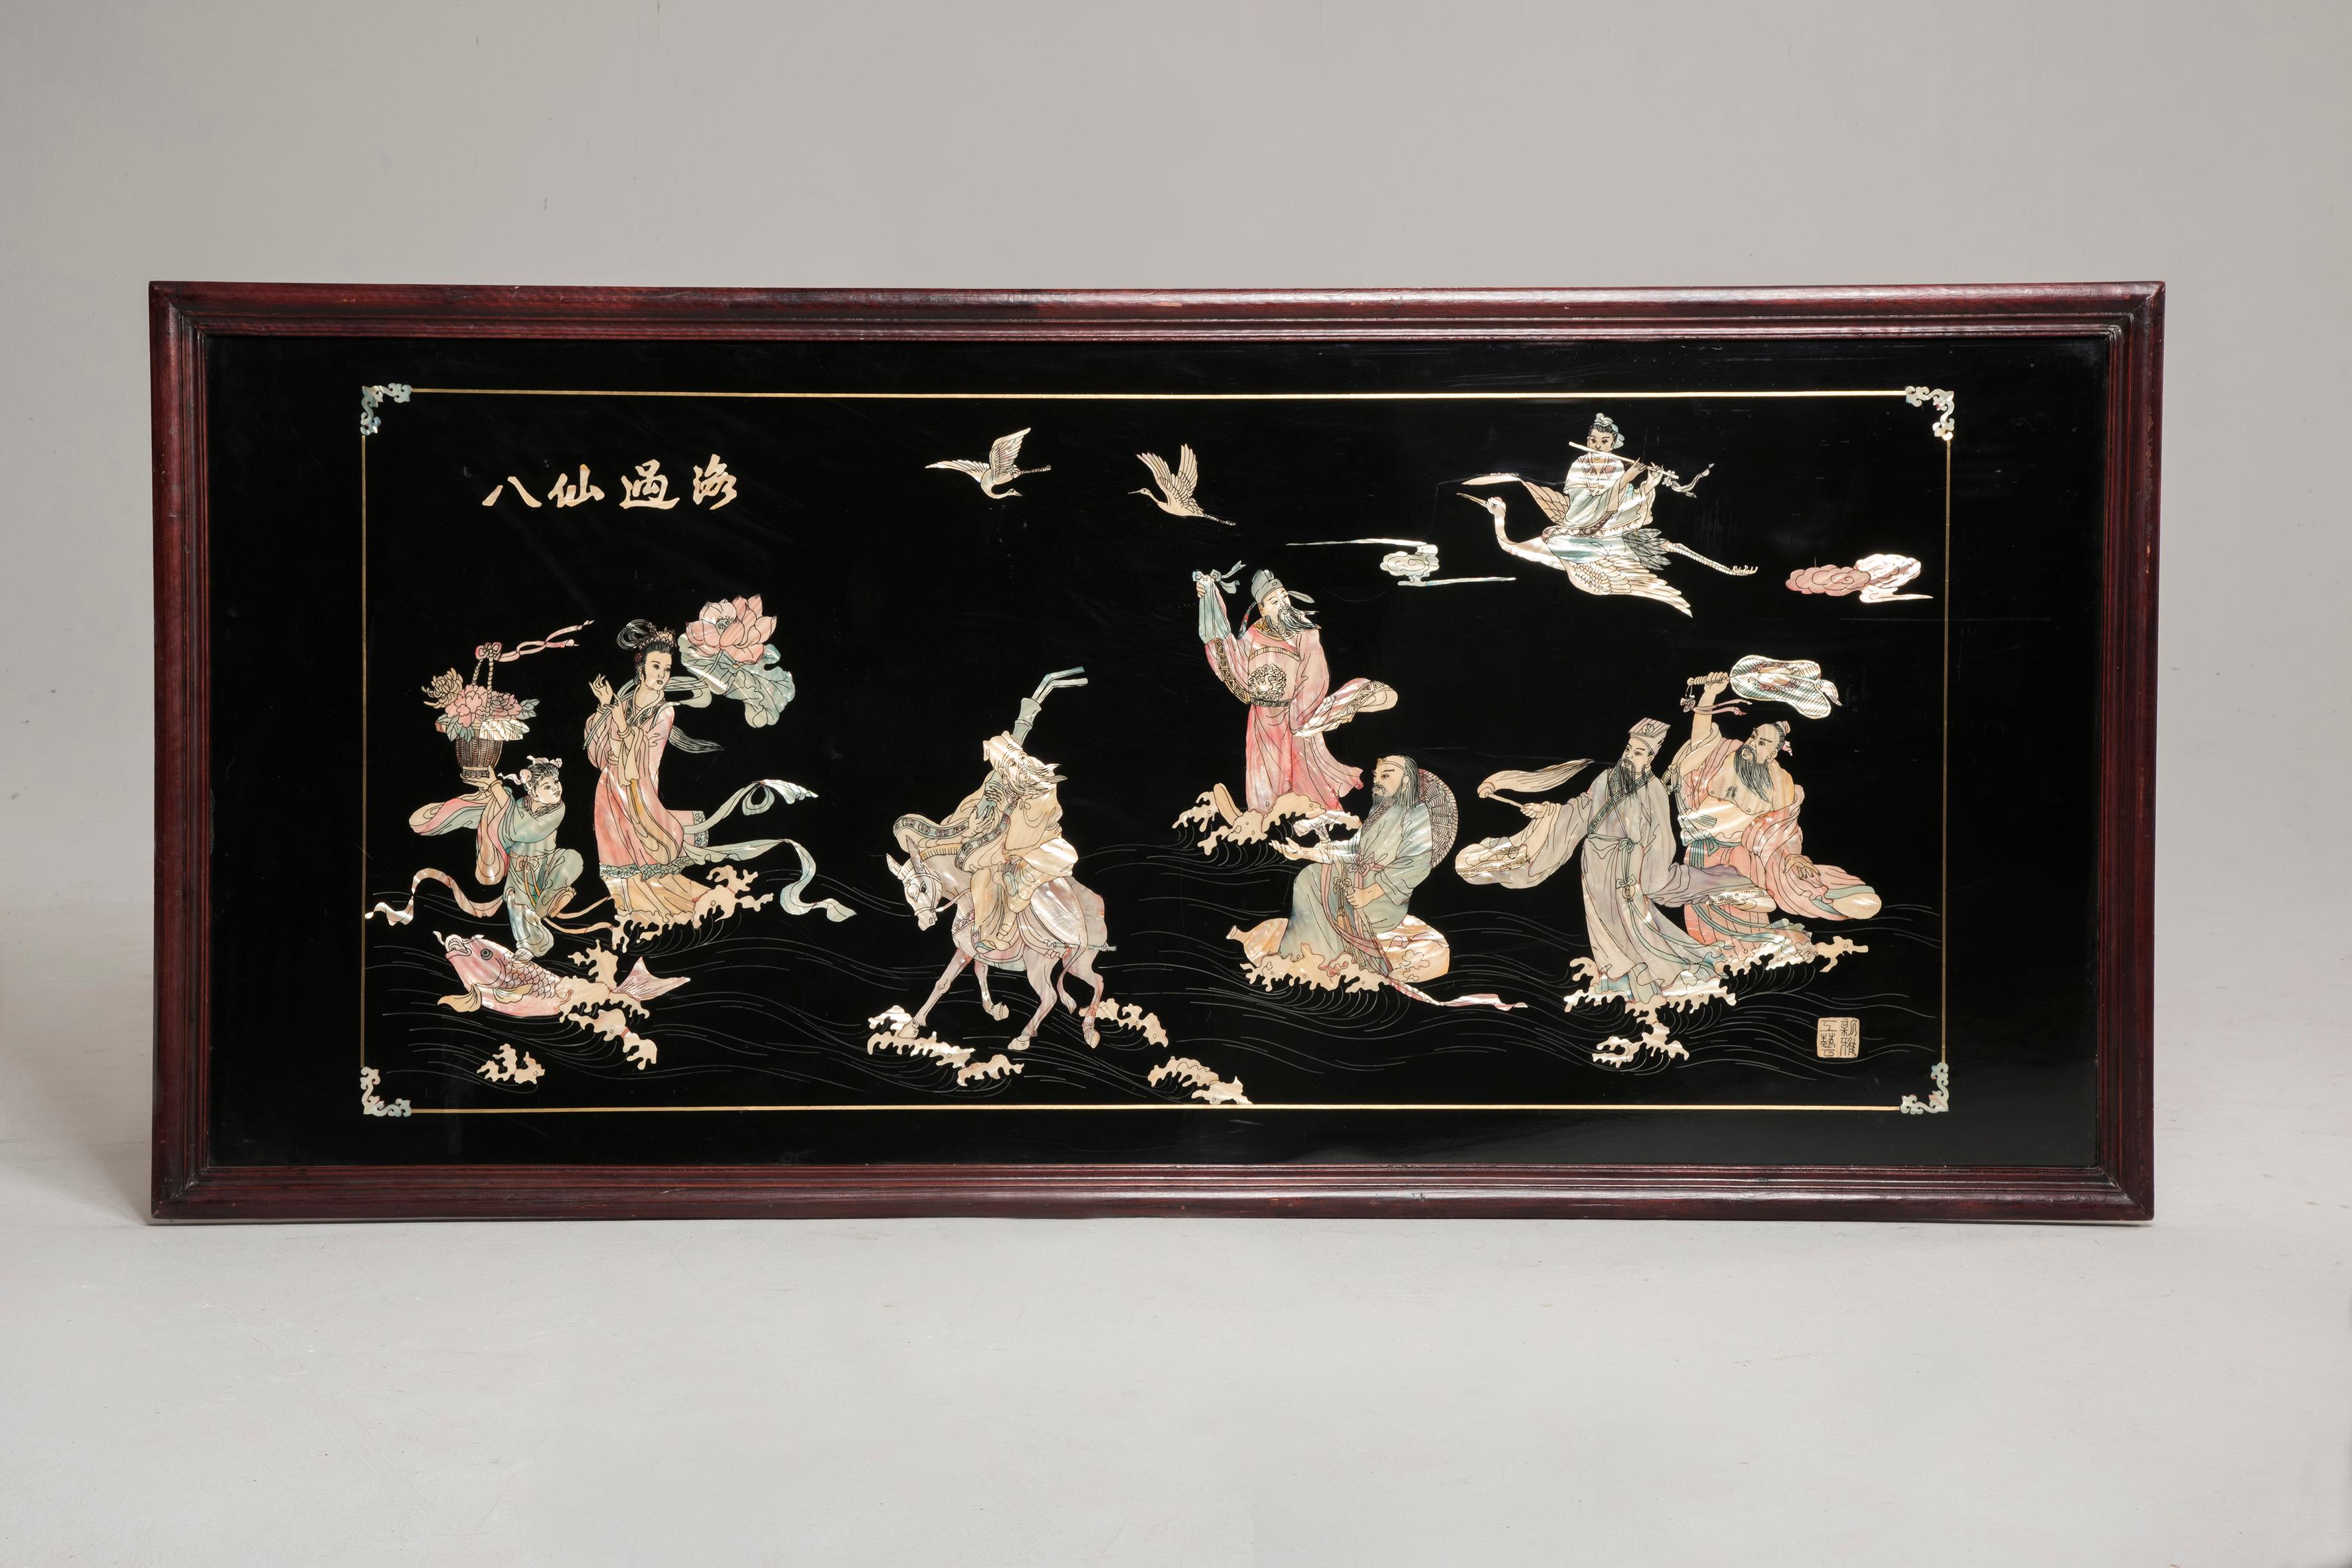 Decorative chinoiserie panel.
It features dark background, mother of pearl inlays and wood lacquered frame. This panel represents traditional Chinese scenes and characters, wearing traditional clothes. Traditional animals from the Chinese culture